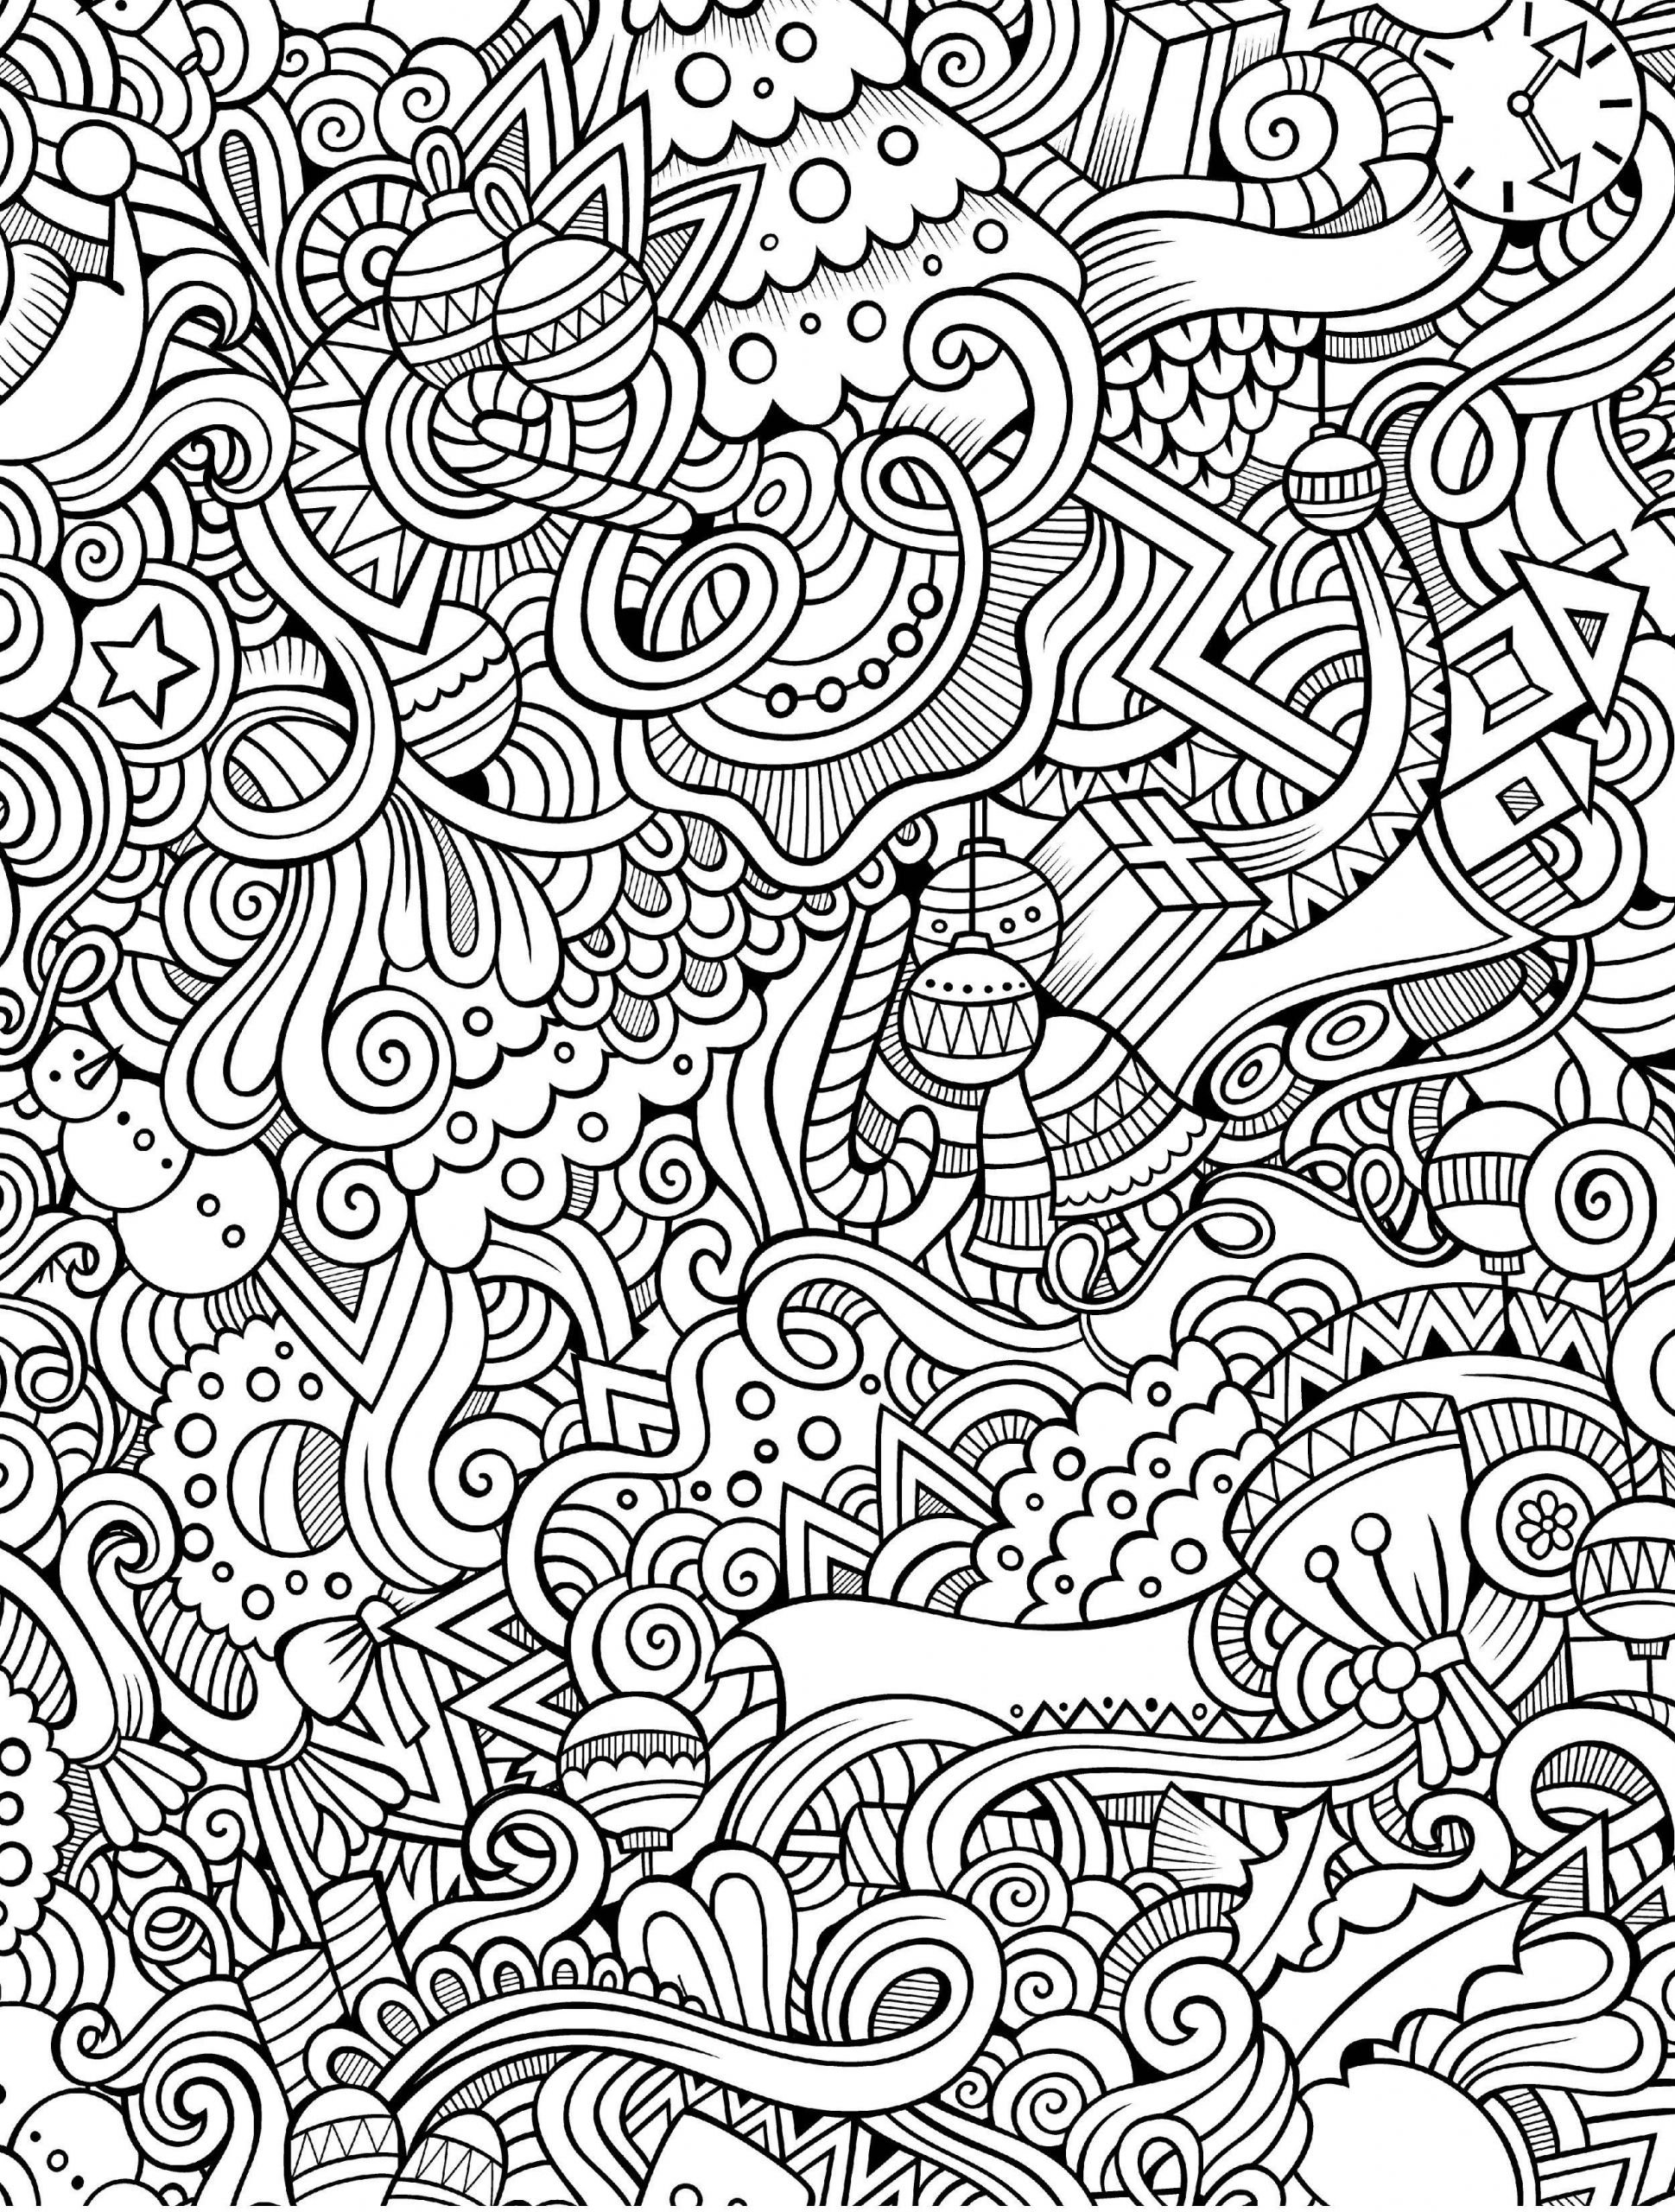 Adult Coloring Book Patterns
 10 Free Printable Holiday Adult Coloring Pages